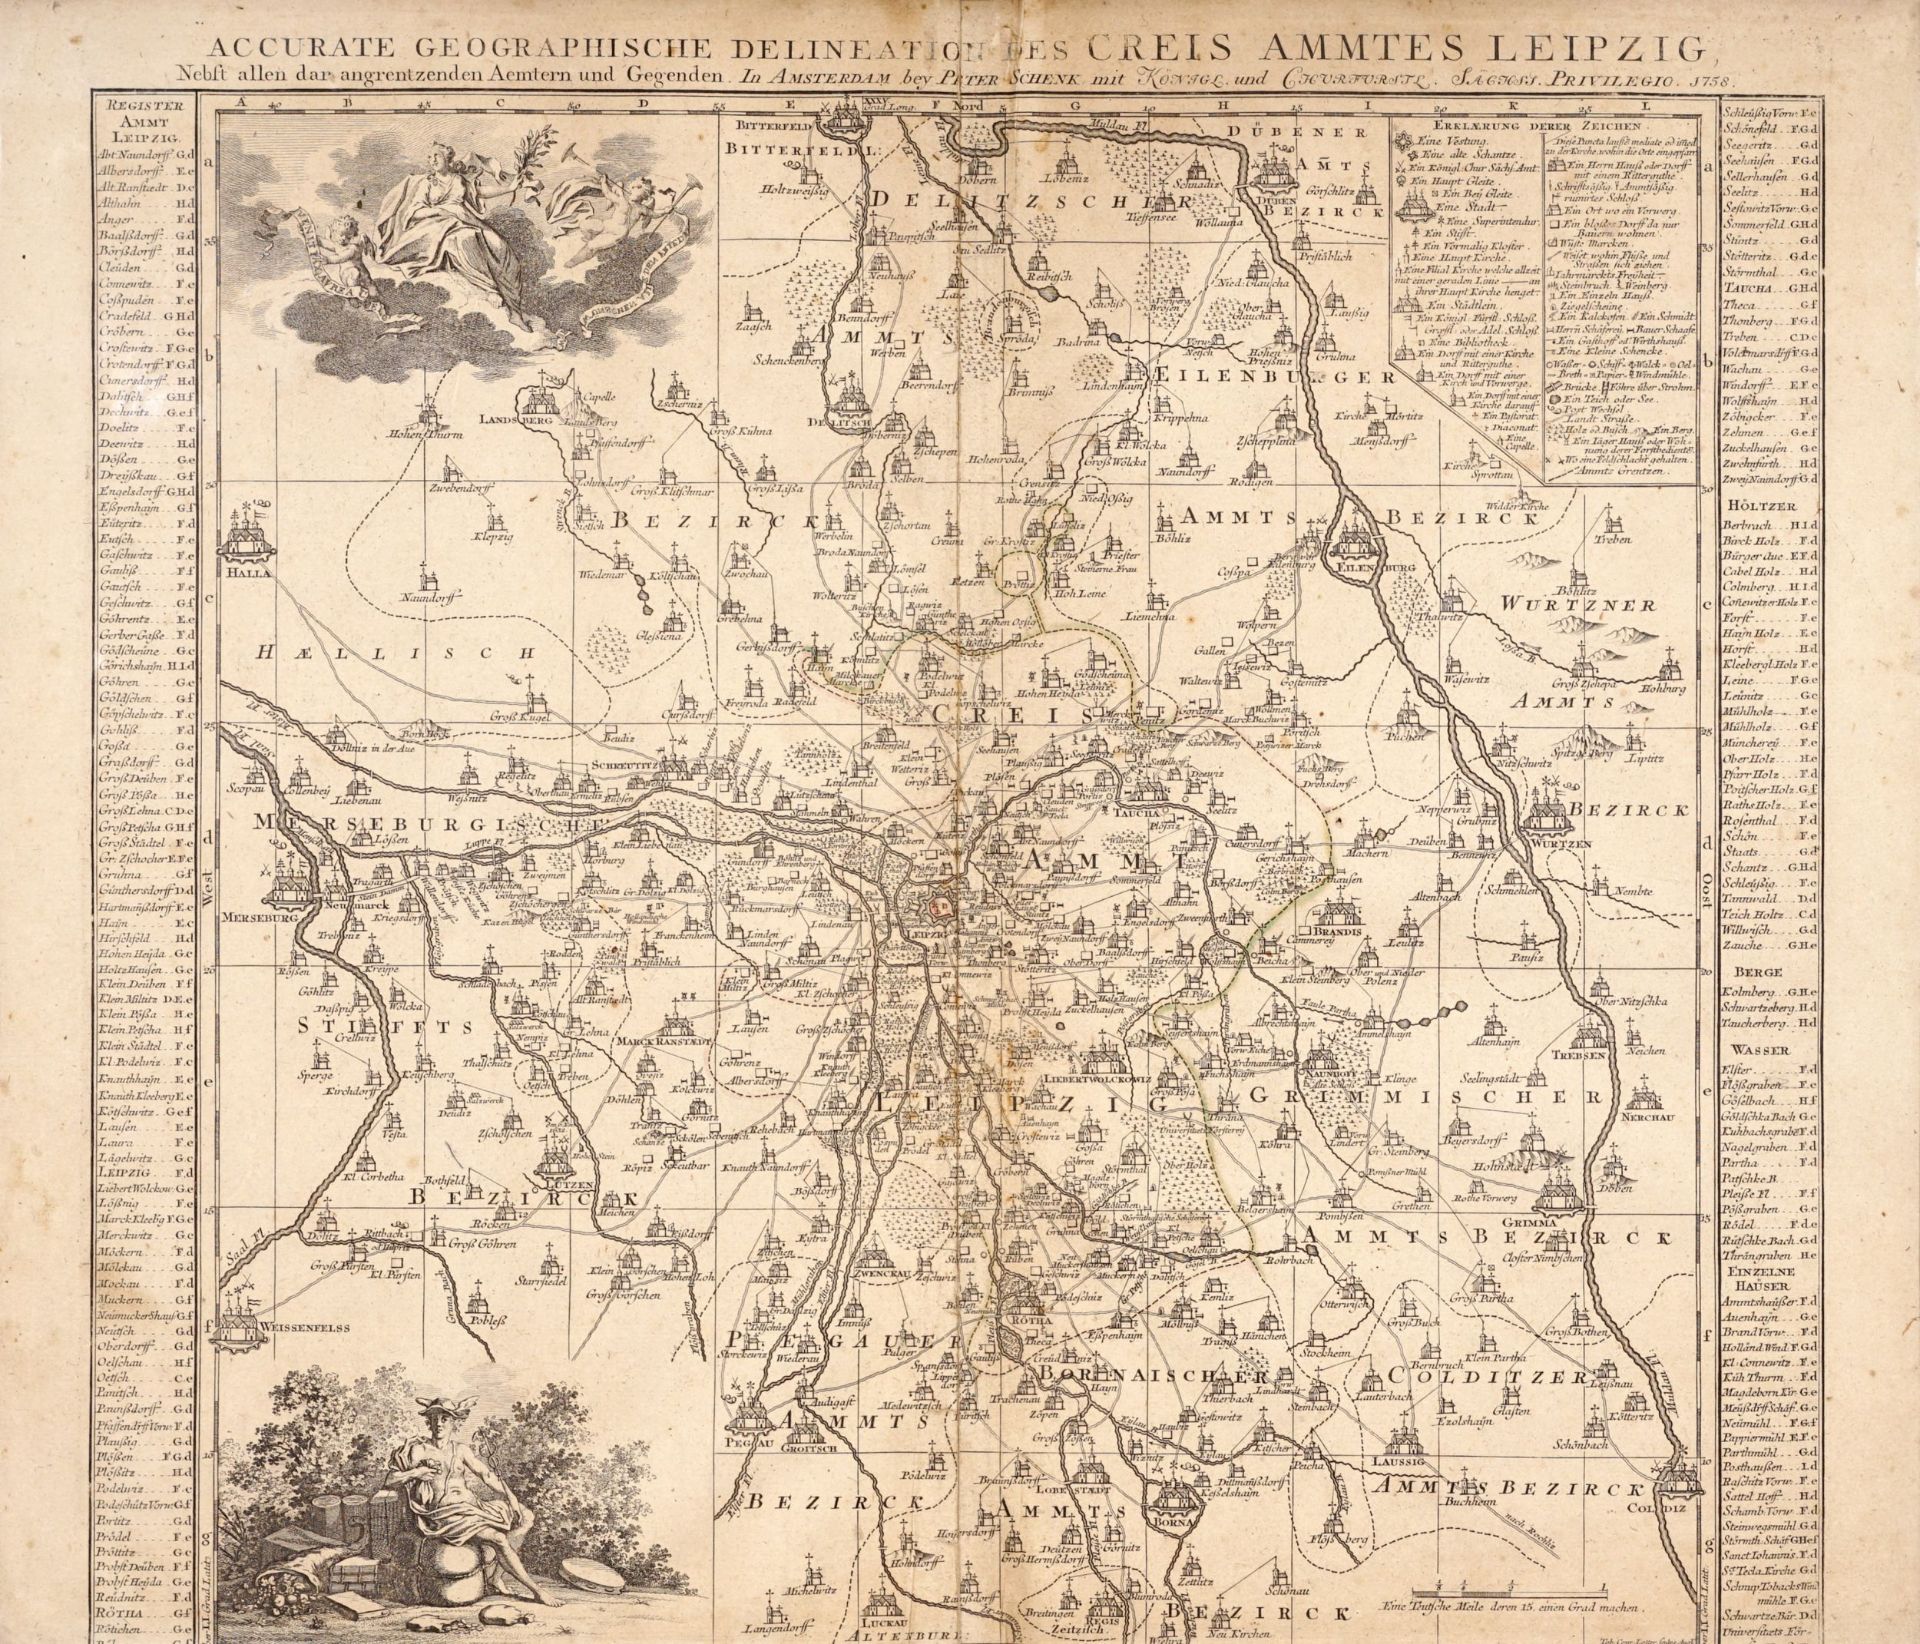 Tobias Conrad Lotter "Accurate geographische delineation des Creis Ammtes Leipzig". 1758.